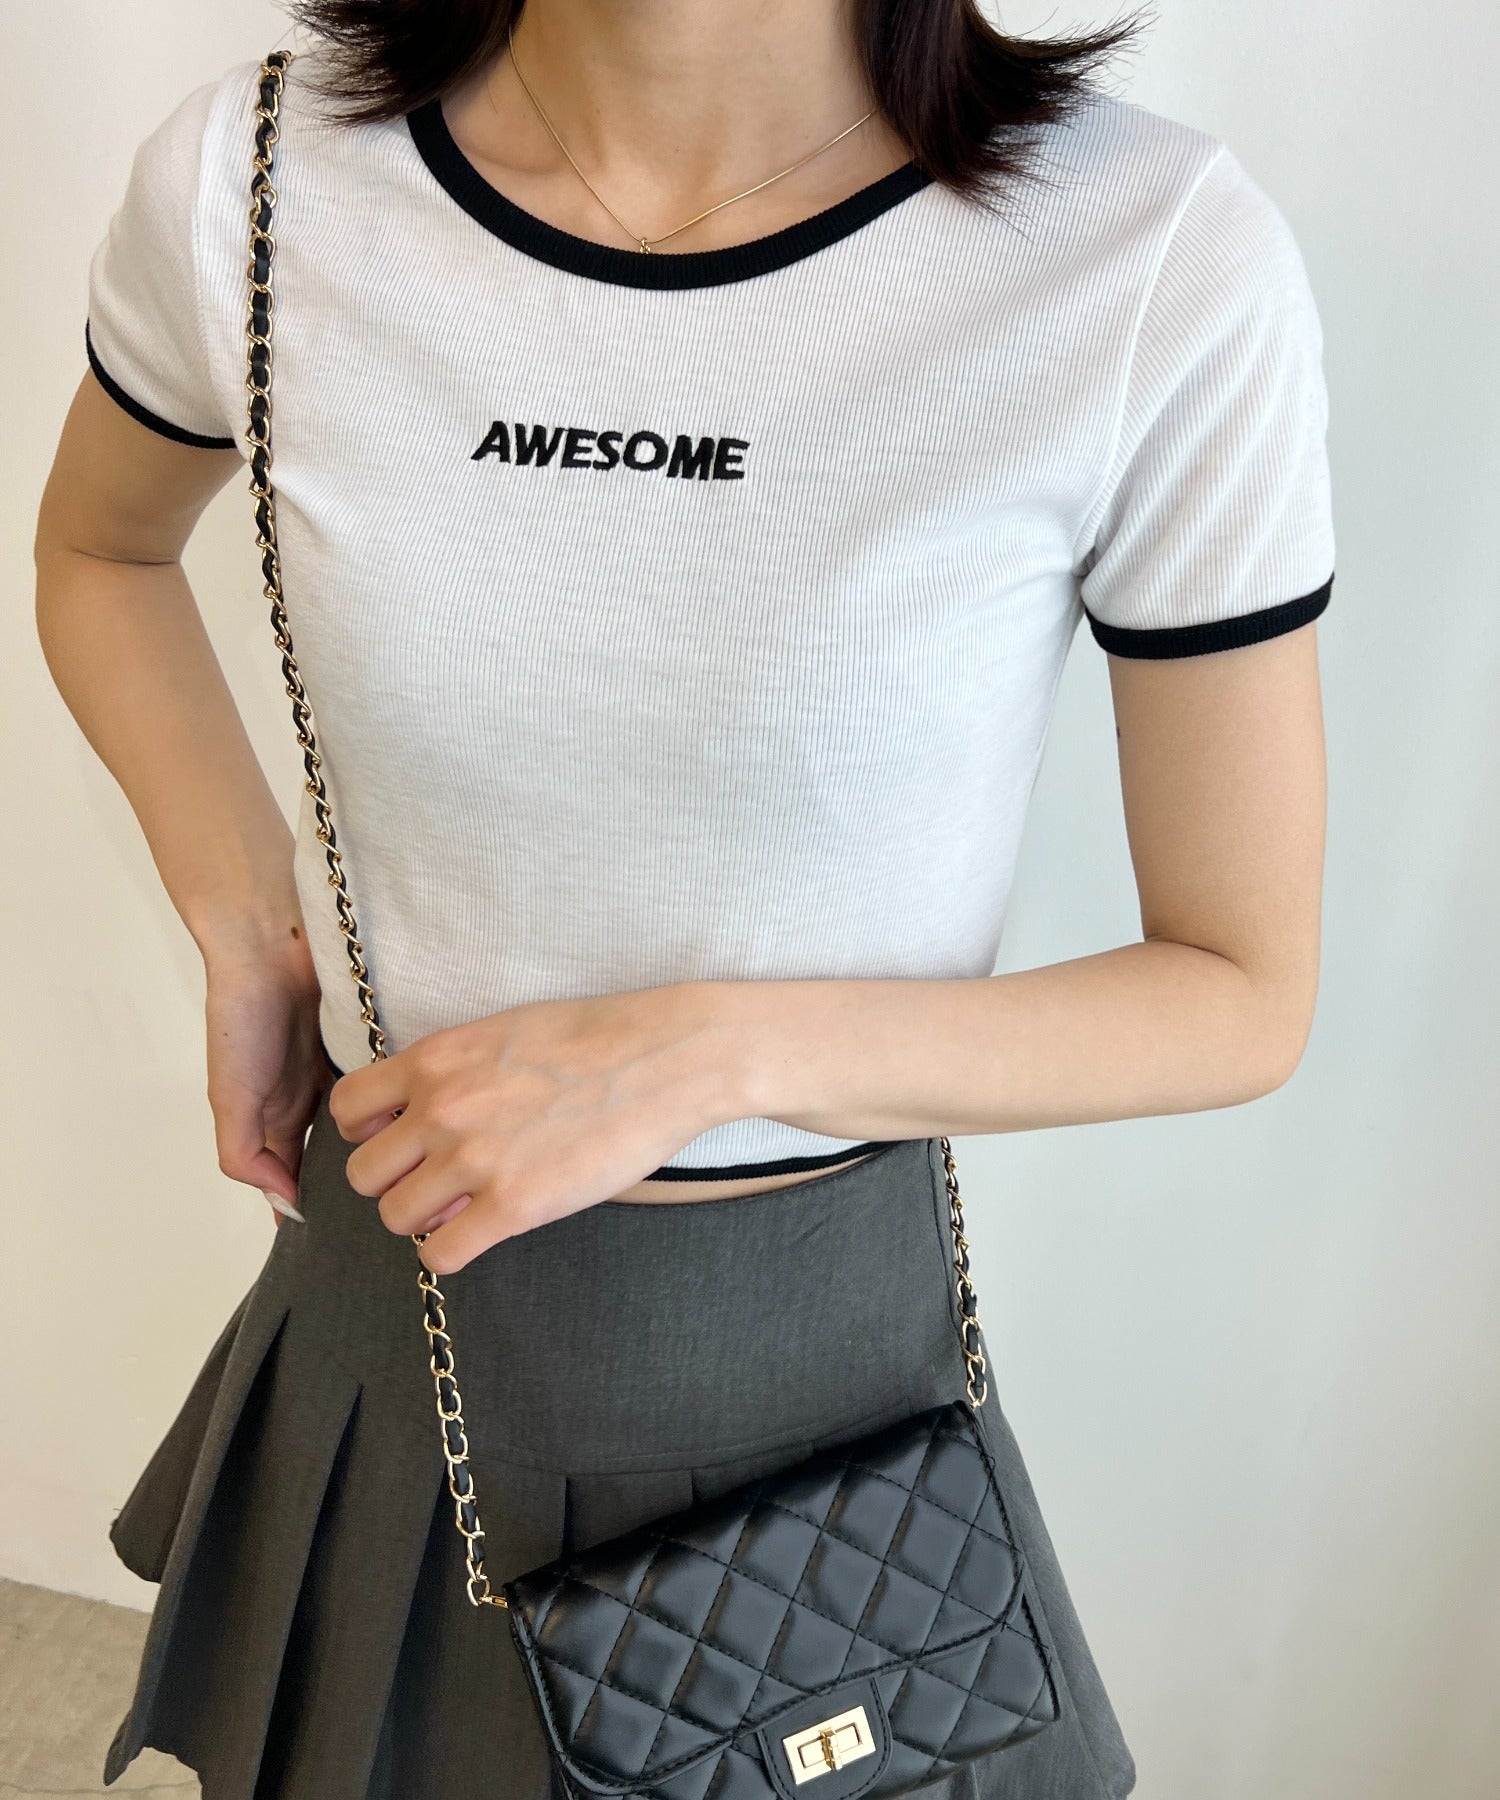 AWESOMEリンガーTシャツ – WEGO ONLINE STORE